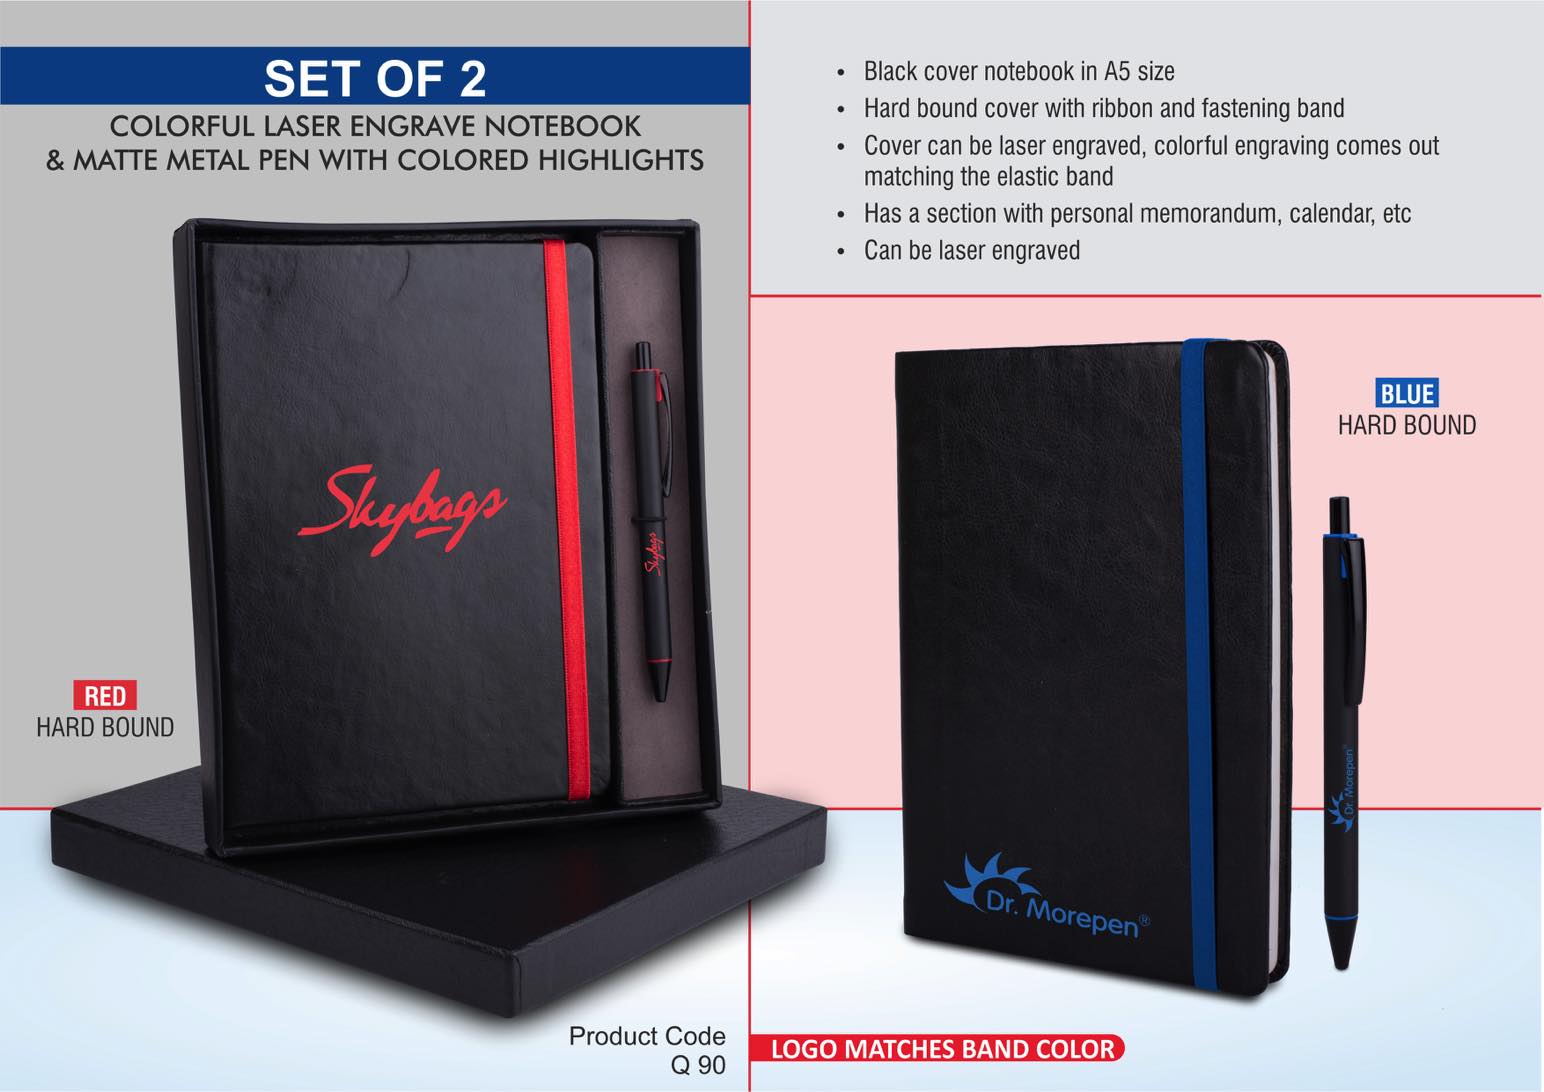 Laser Engrave Color Notebook with Metal Highlight Pen Gift Set in Premium Box: Blue